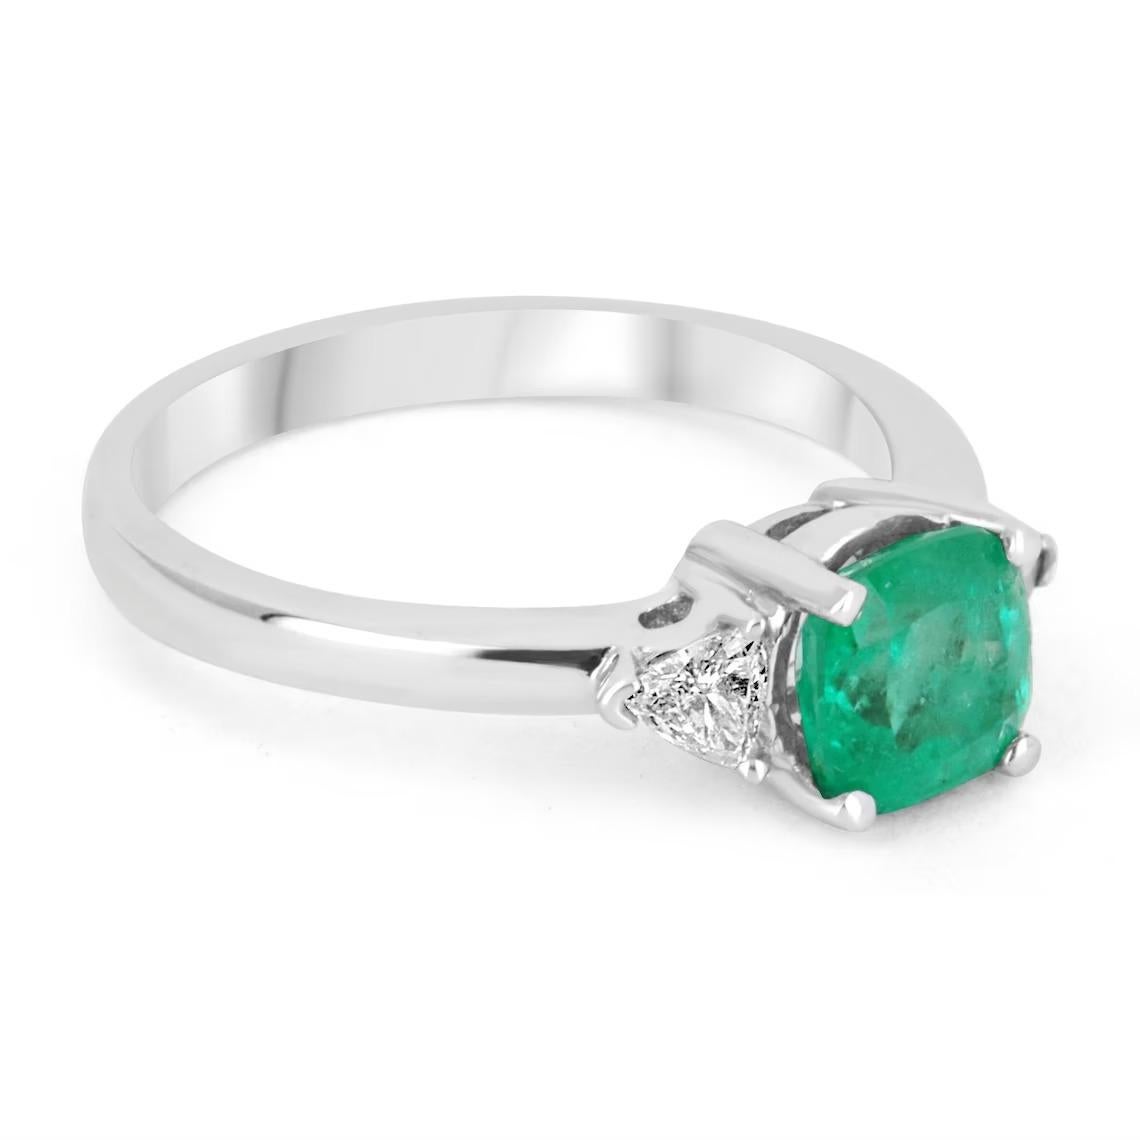 A classic Colombian emerald and diamond three-stone ring. Dexterously crafted in gleaming 18K white gold this ring features a natural Colombian emerald, cushion cut from the famous Muzo mines. Set in a secure four prong setting, this extraordinary